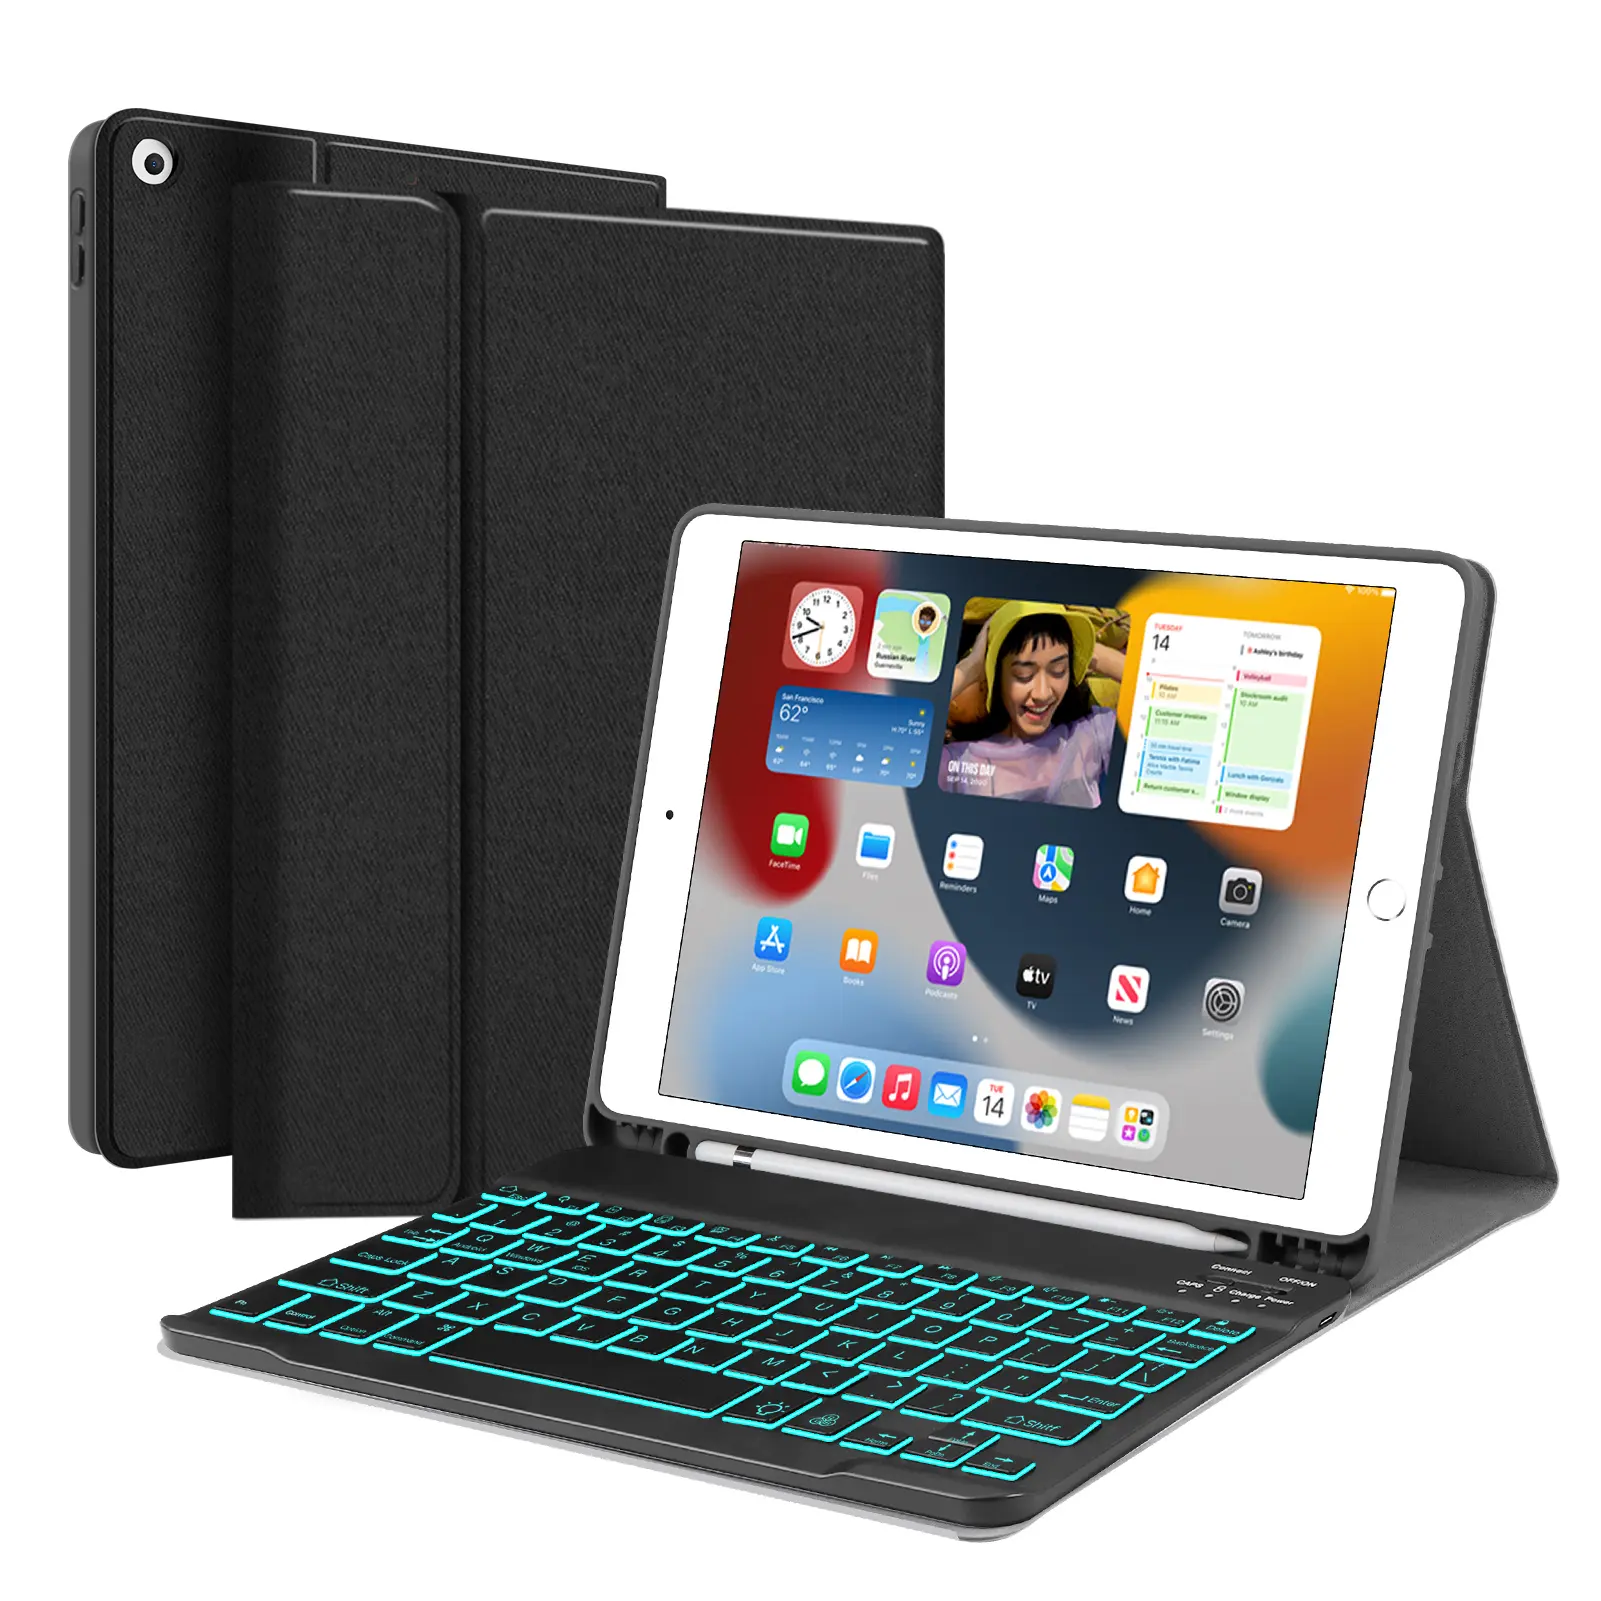 Hot Sale Pu Leather For Ipad 7/8/9th 10.2 Inches With Pencil Holder Seven color backlight For Ipad Pro 11 Keyboard Cover